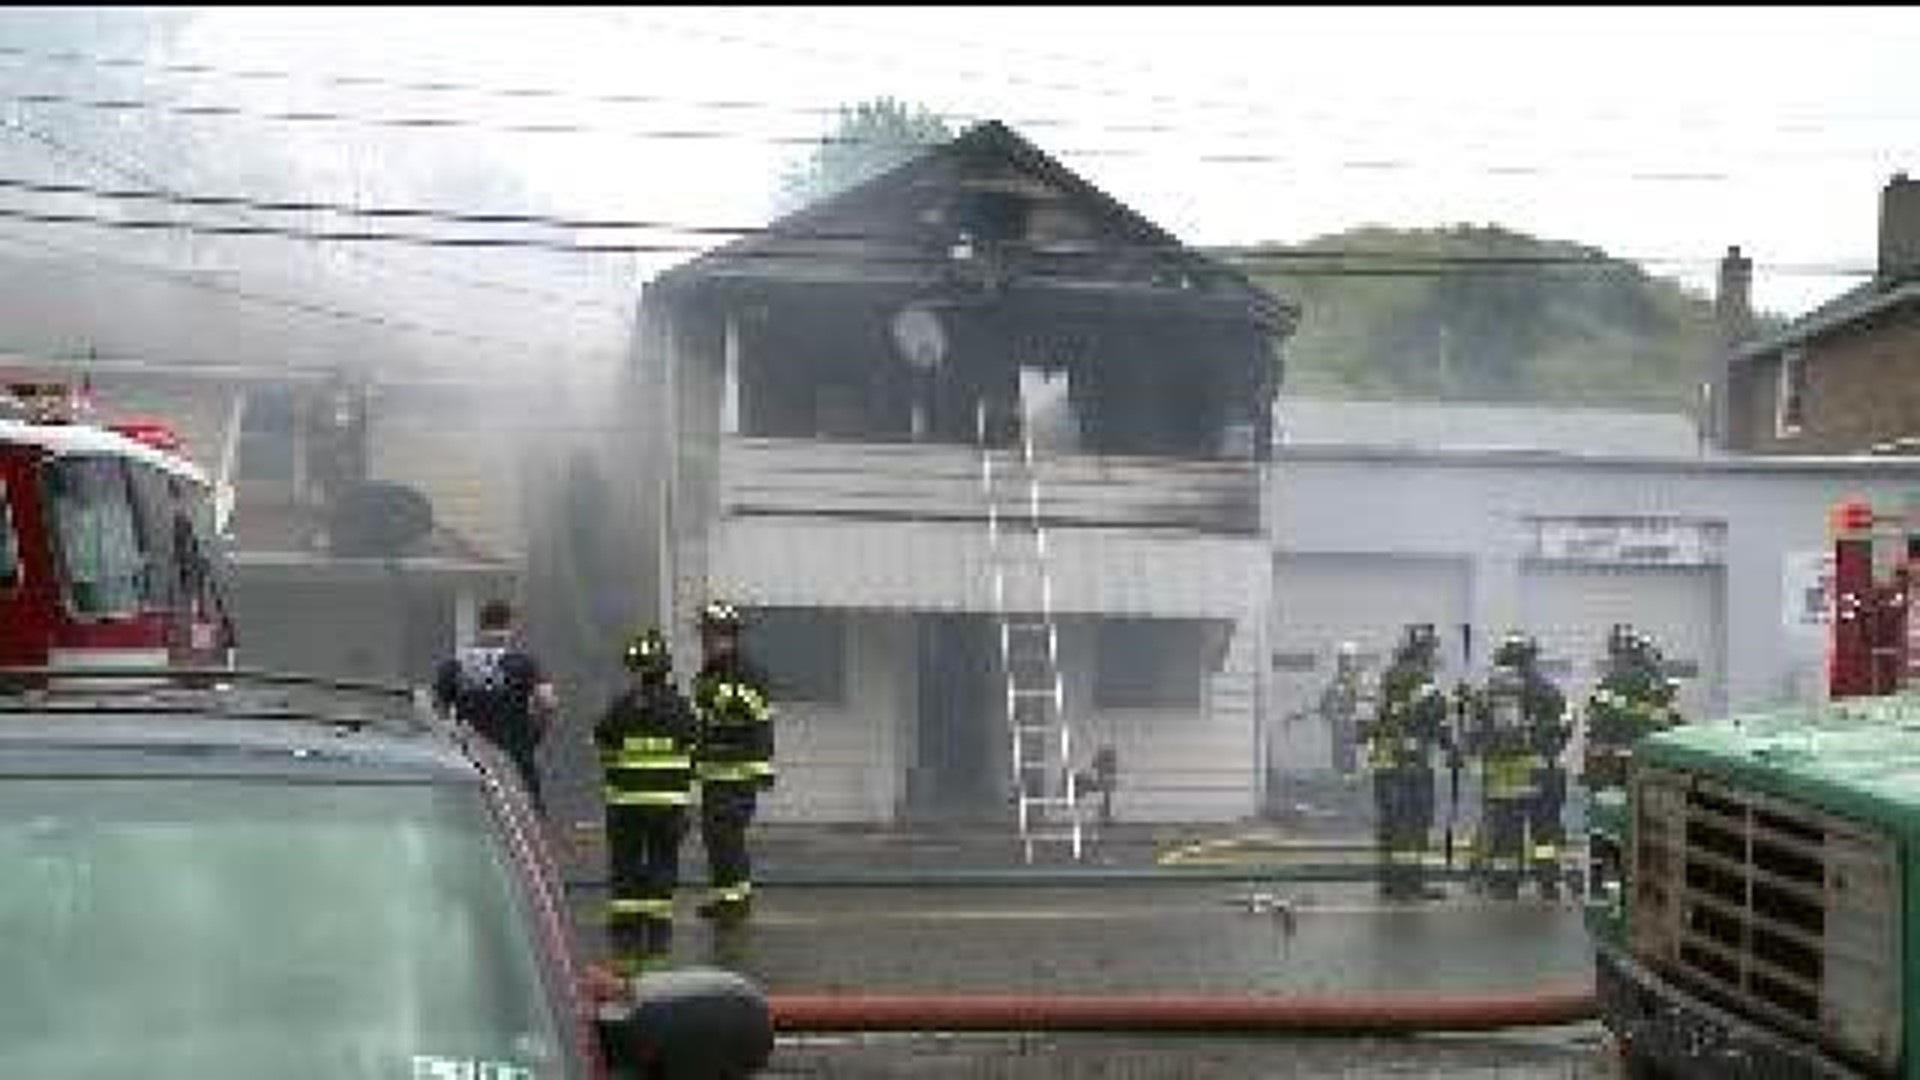 911 Dispatcher Suspended After Deadly Fire